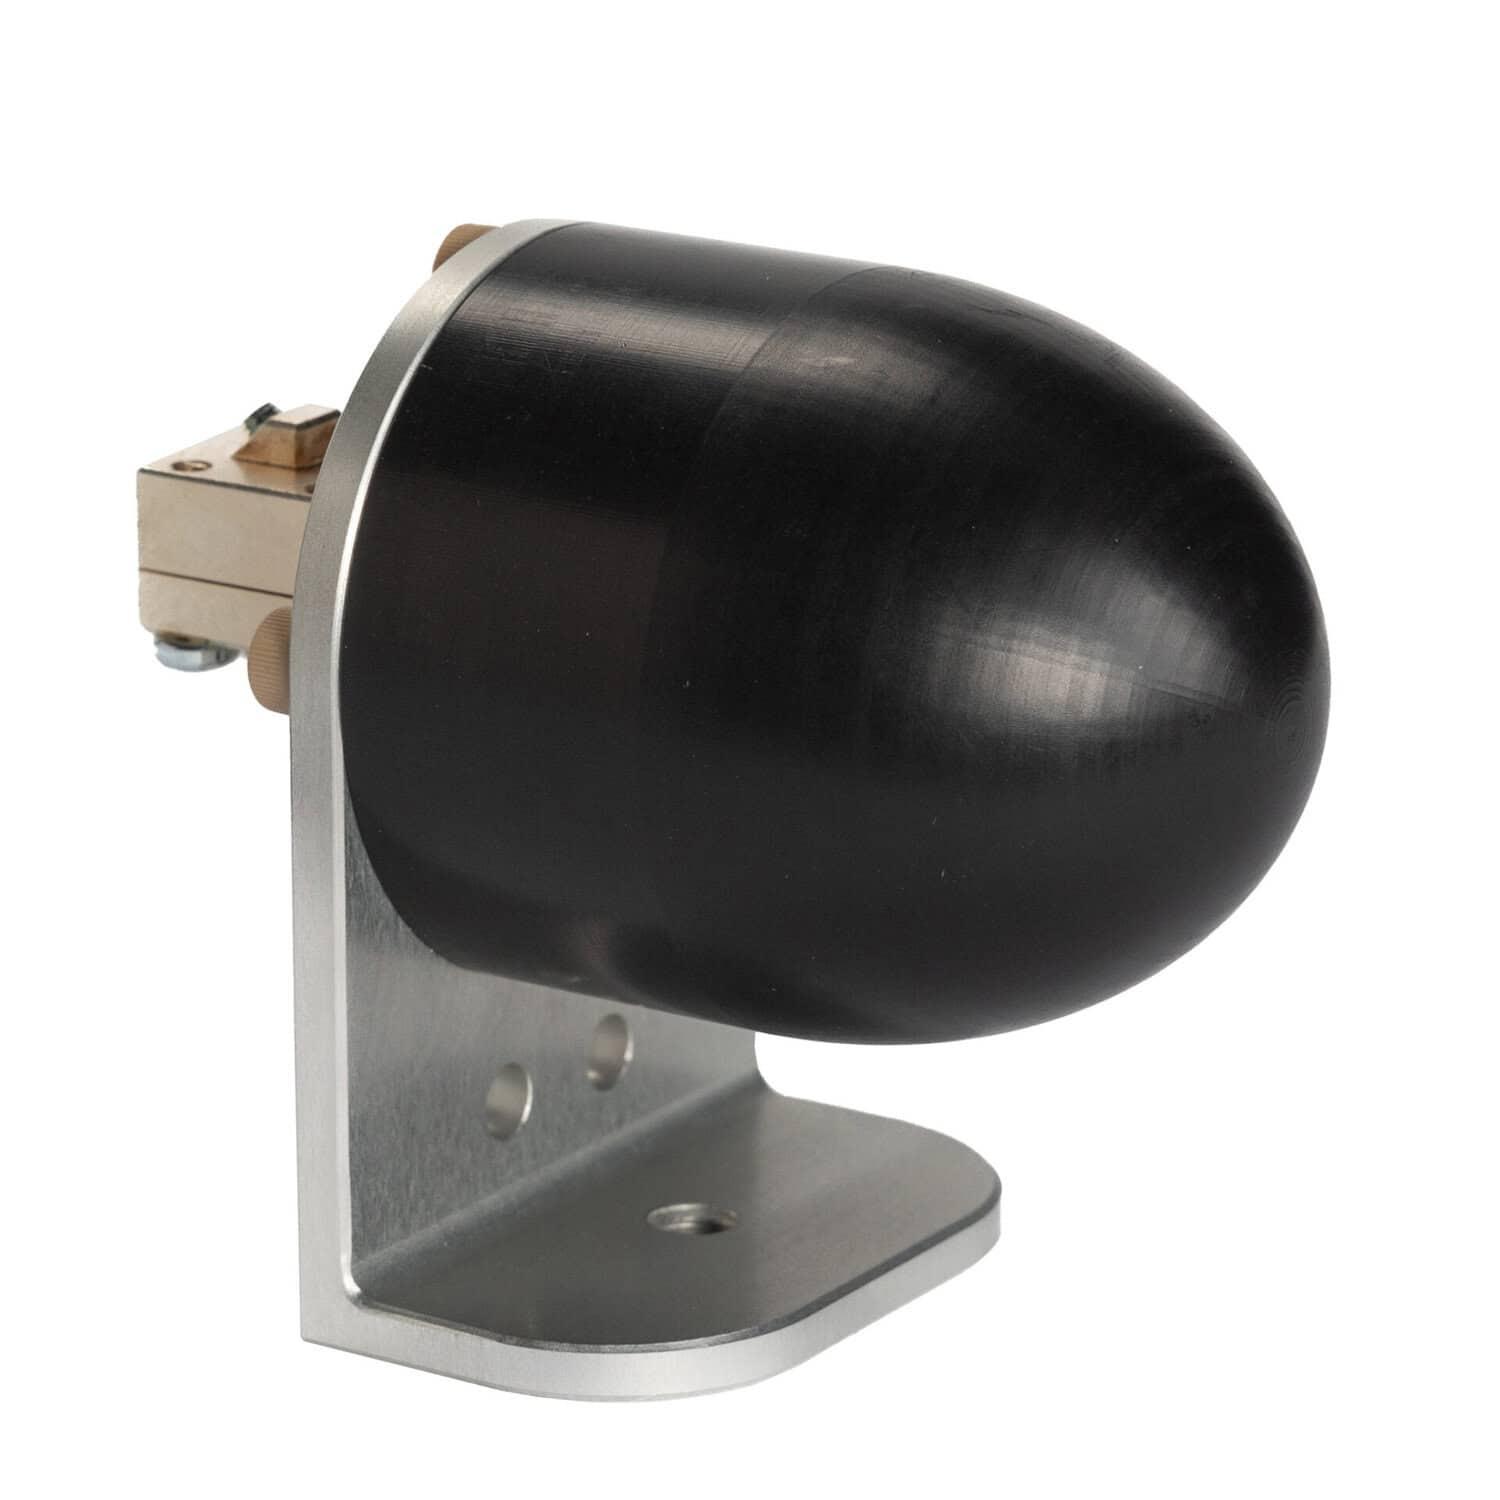 Product DLA – Wideband high gain lens antenna - ExcellAnt image